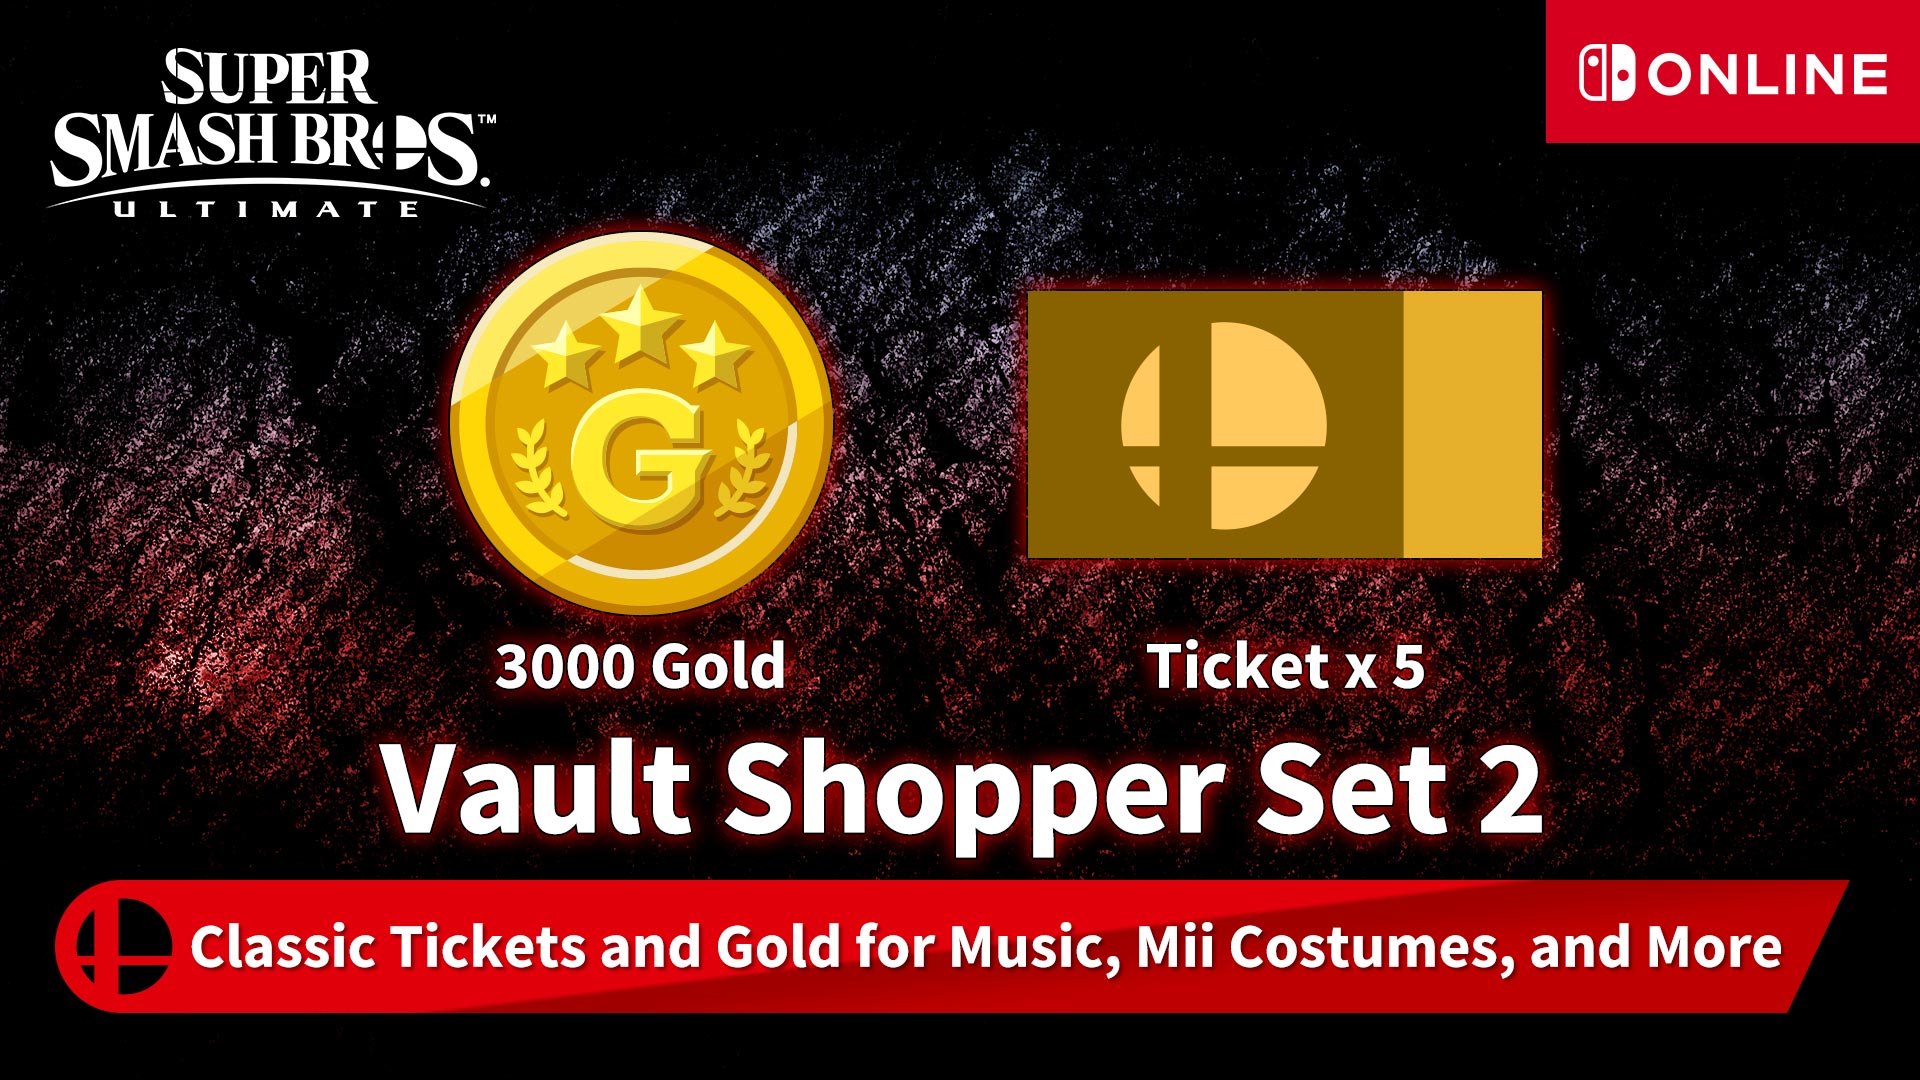 Vault Shopper Set 2 -Classic Tickets and Gold for Music, Mii Costumes, and More-